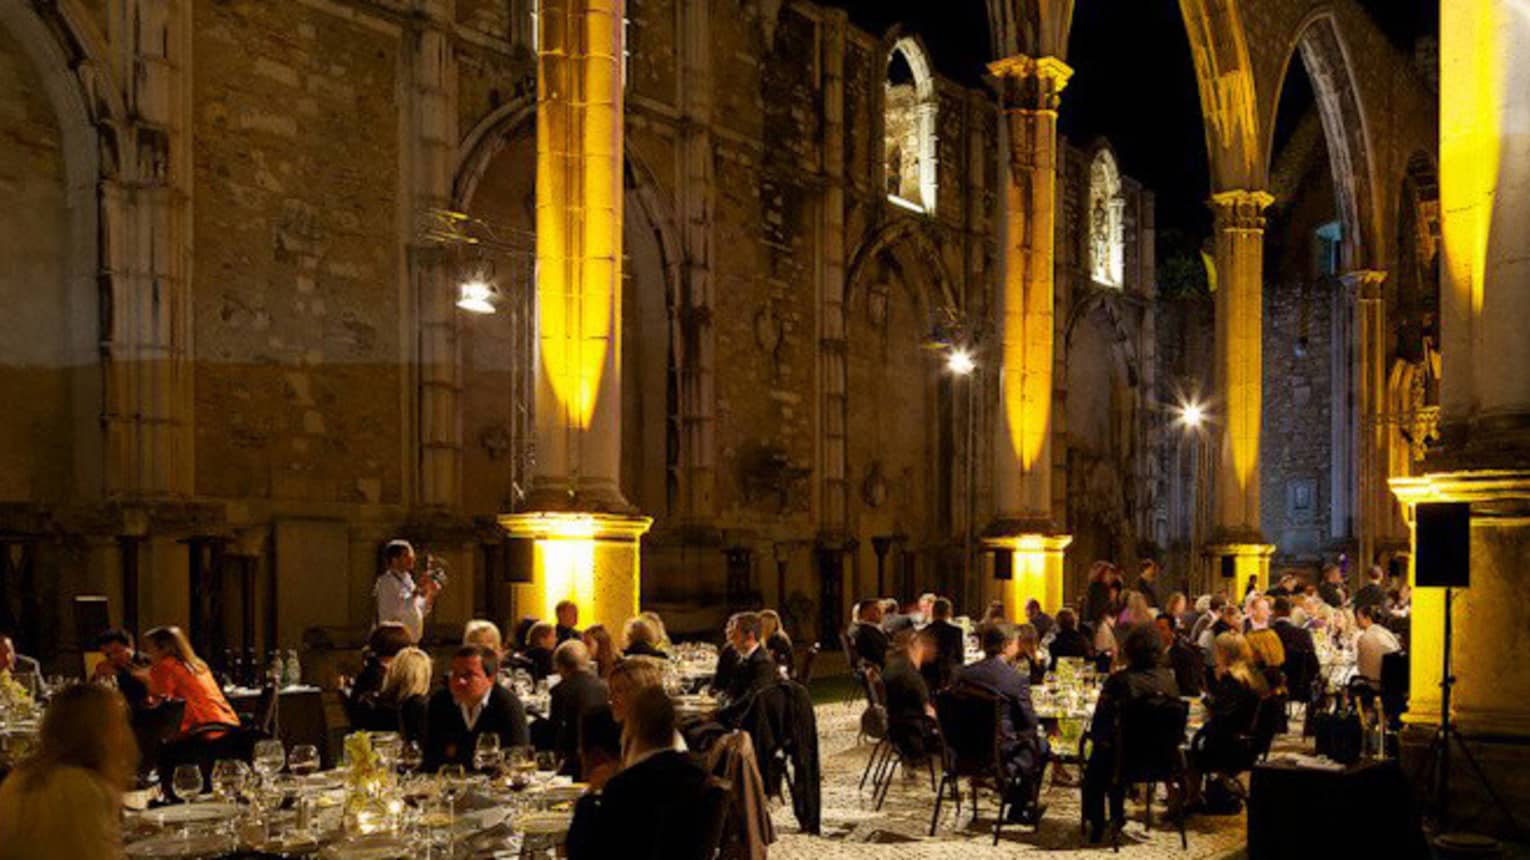 Guests dine at round banquet tables under large historic stone building at night